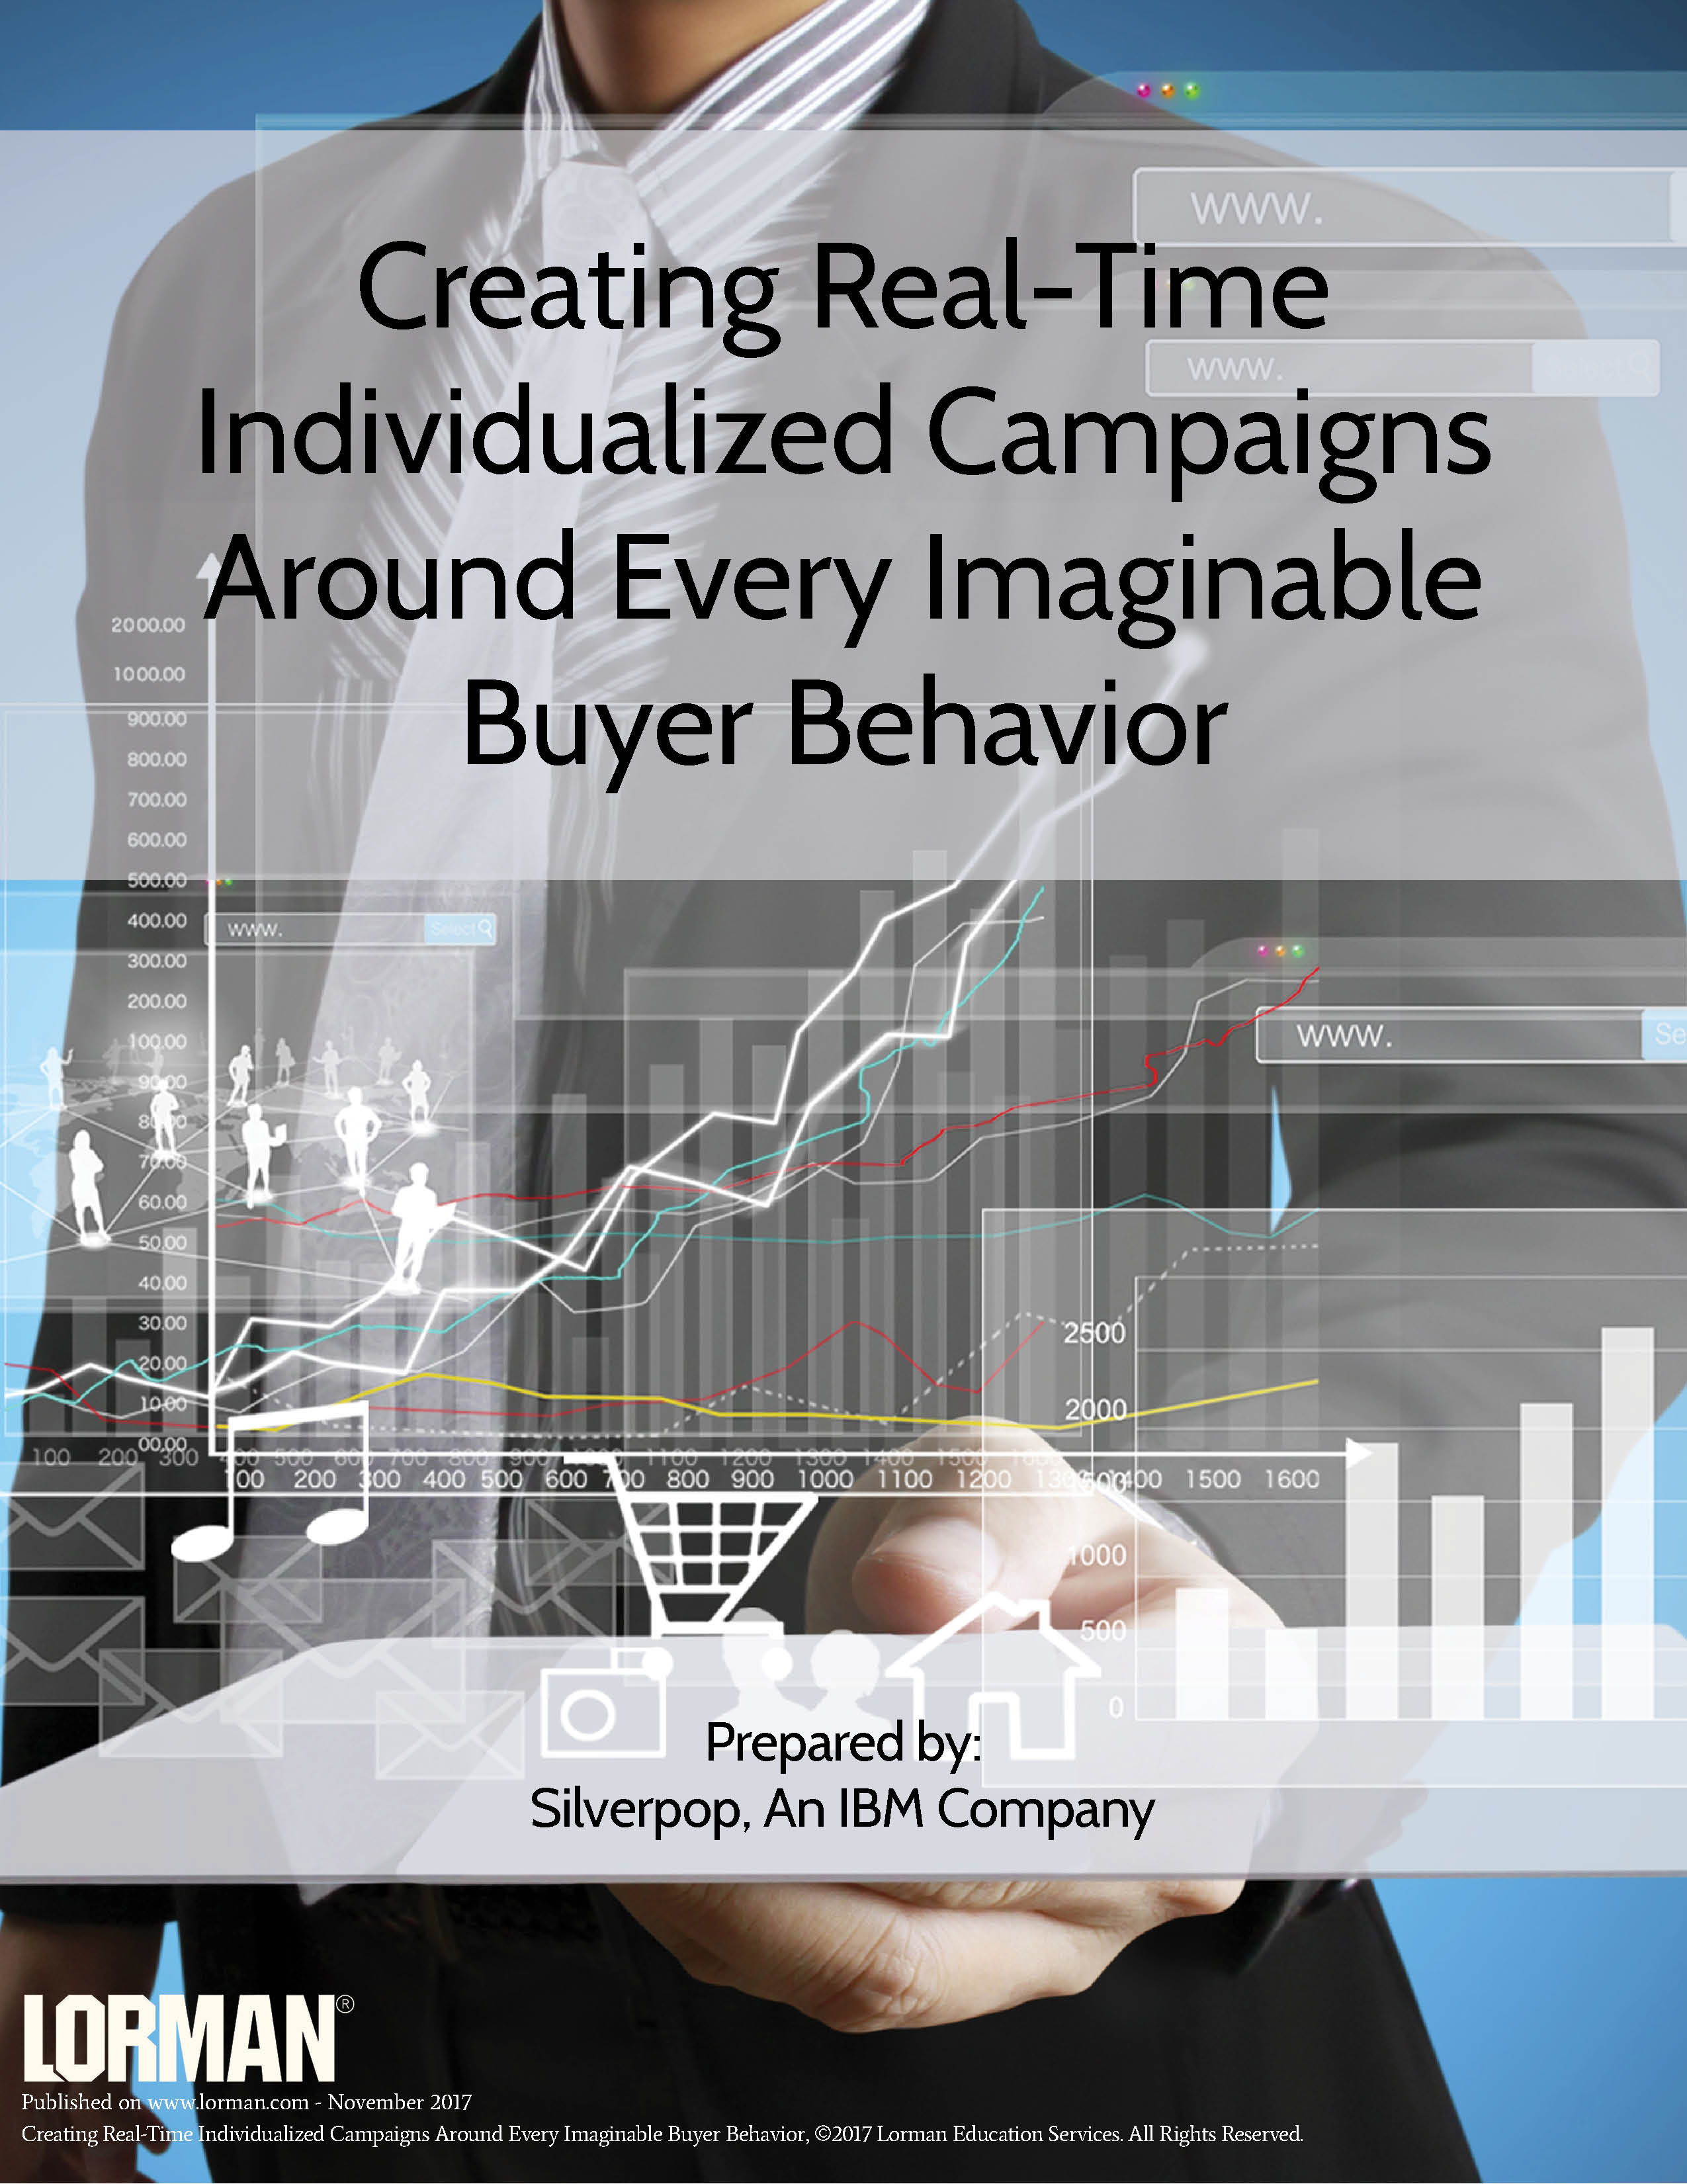 Creating Real-Time Individualized Campaigns Around Every Imaginable Buyer Behavior